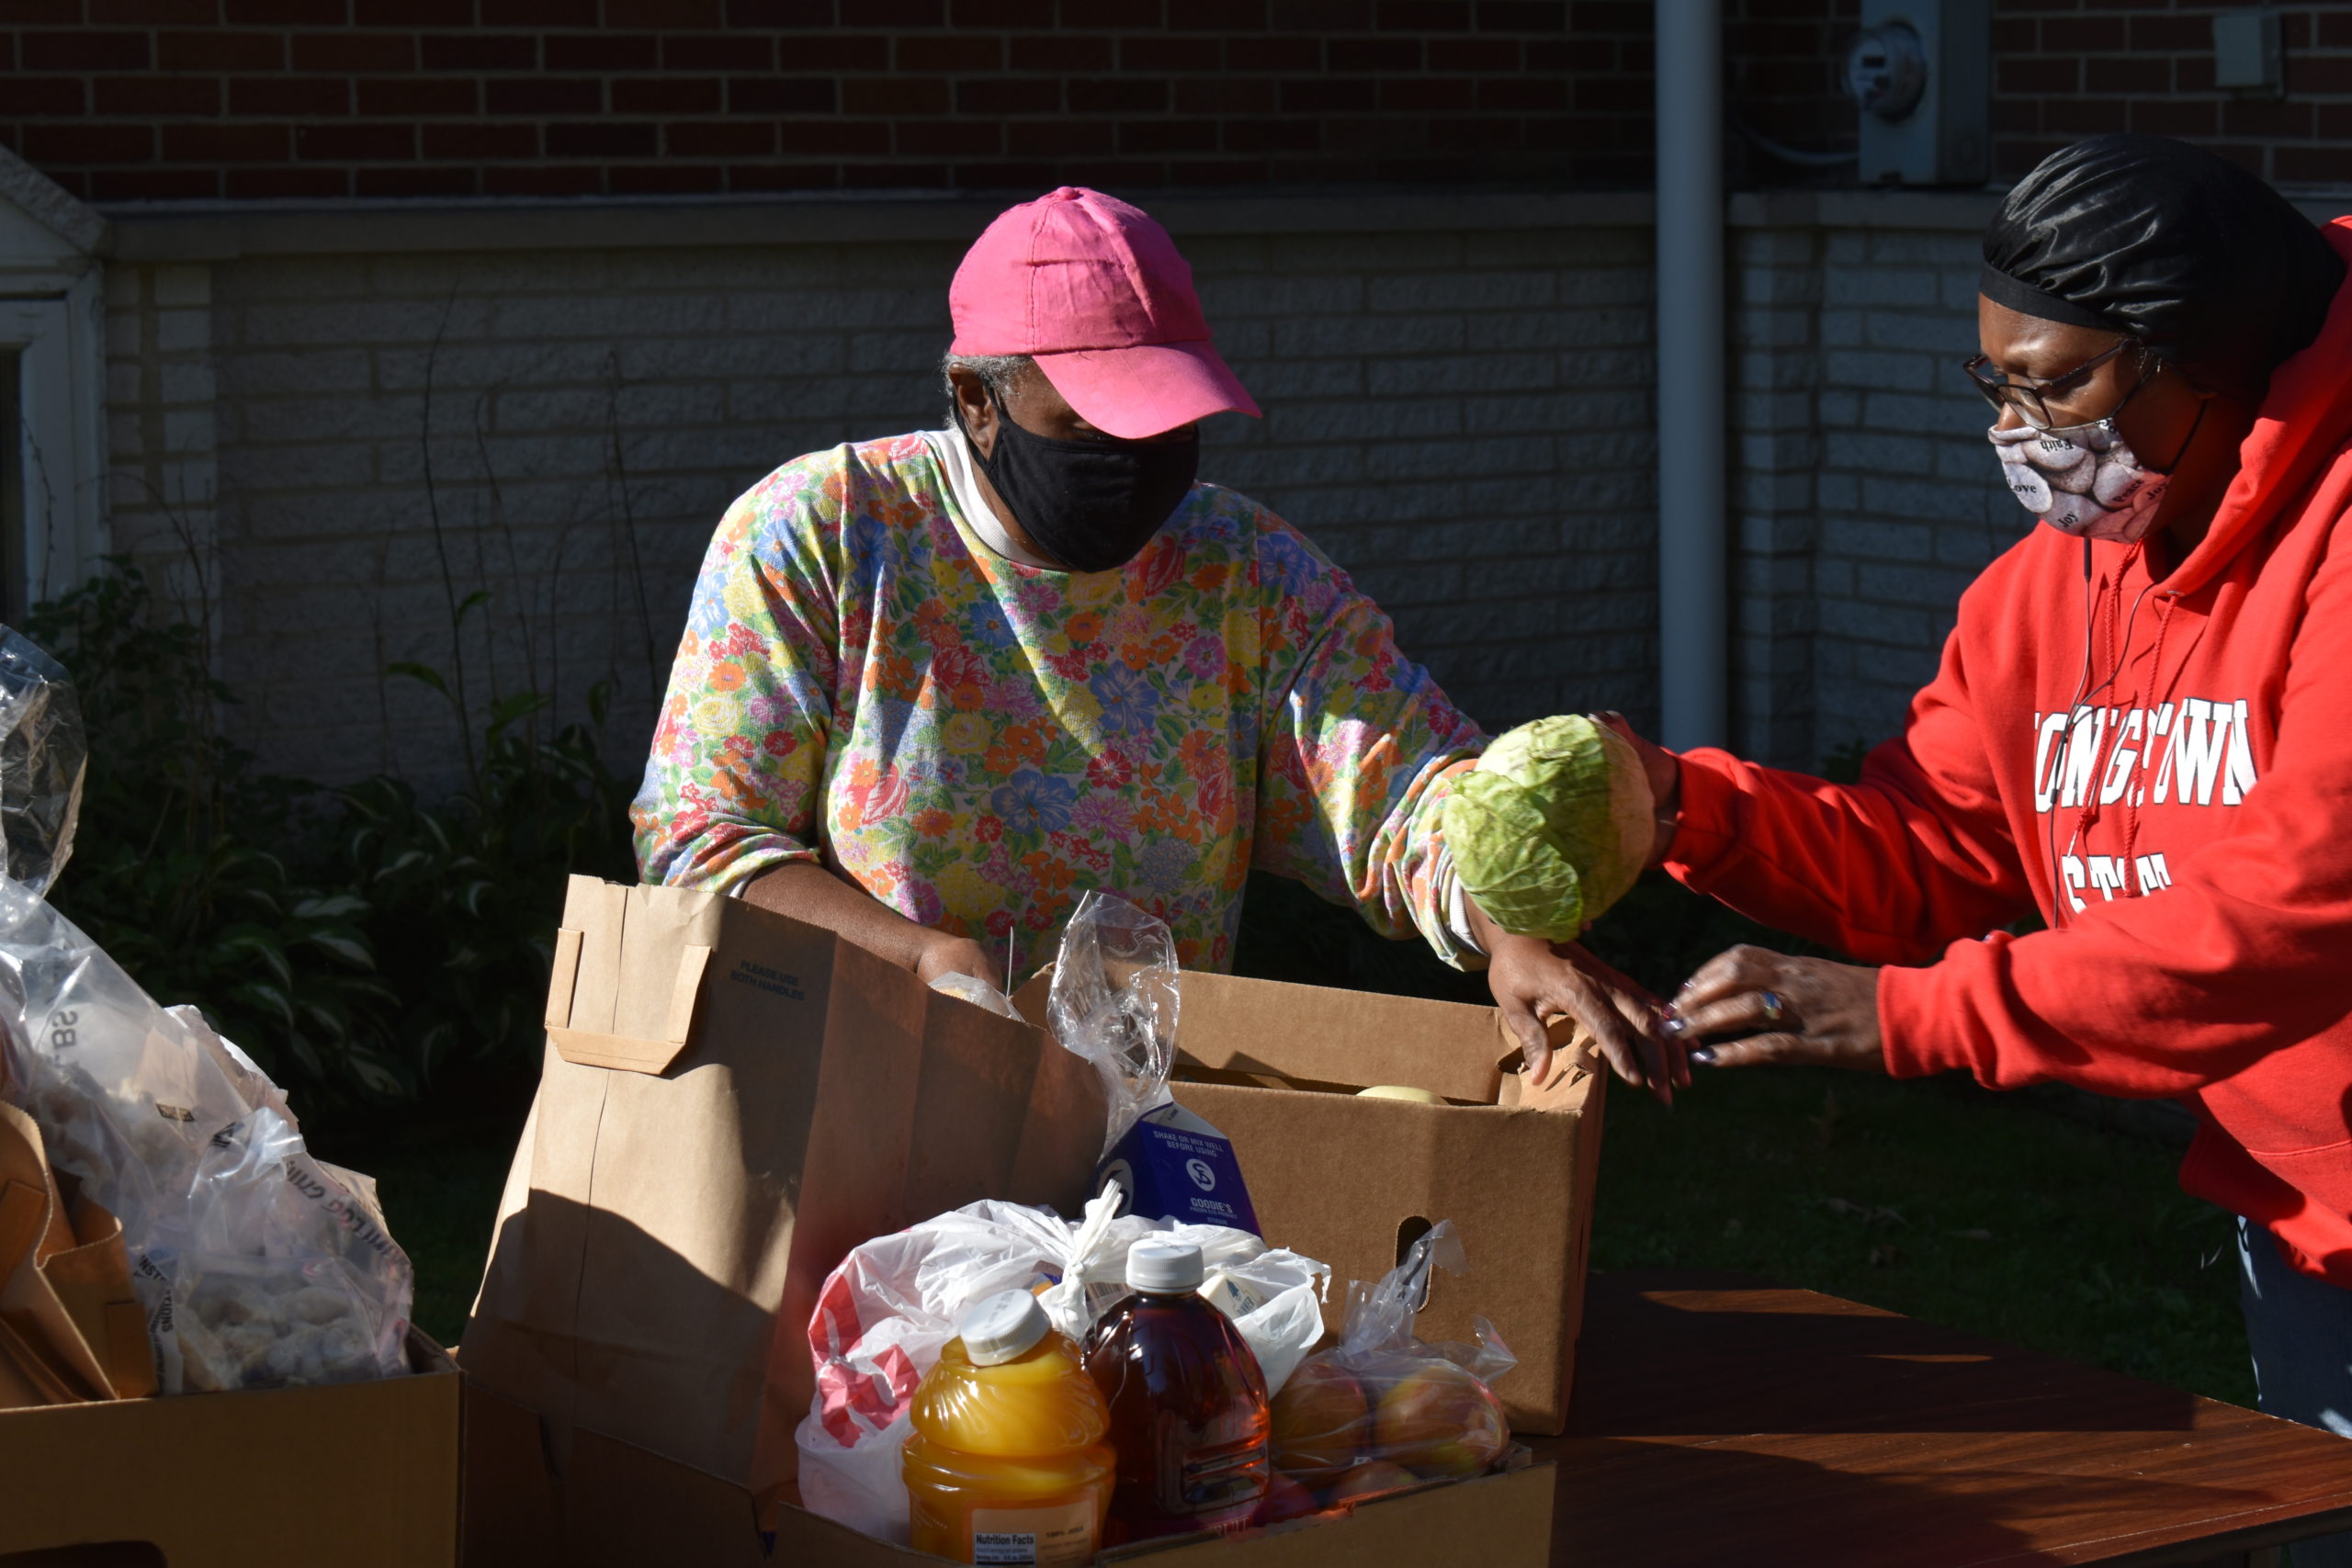 Creola Snow, left, and Veronica Peavy prepare a food box at the Mount Olive pantry on Sept. 19.